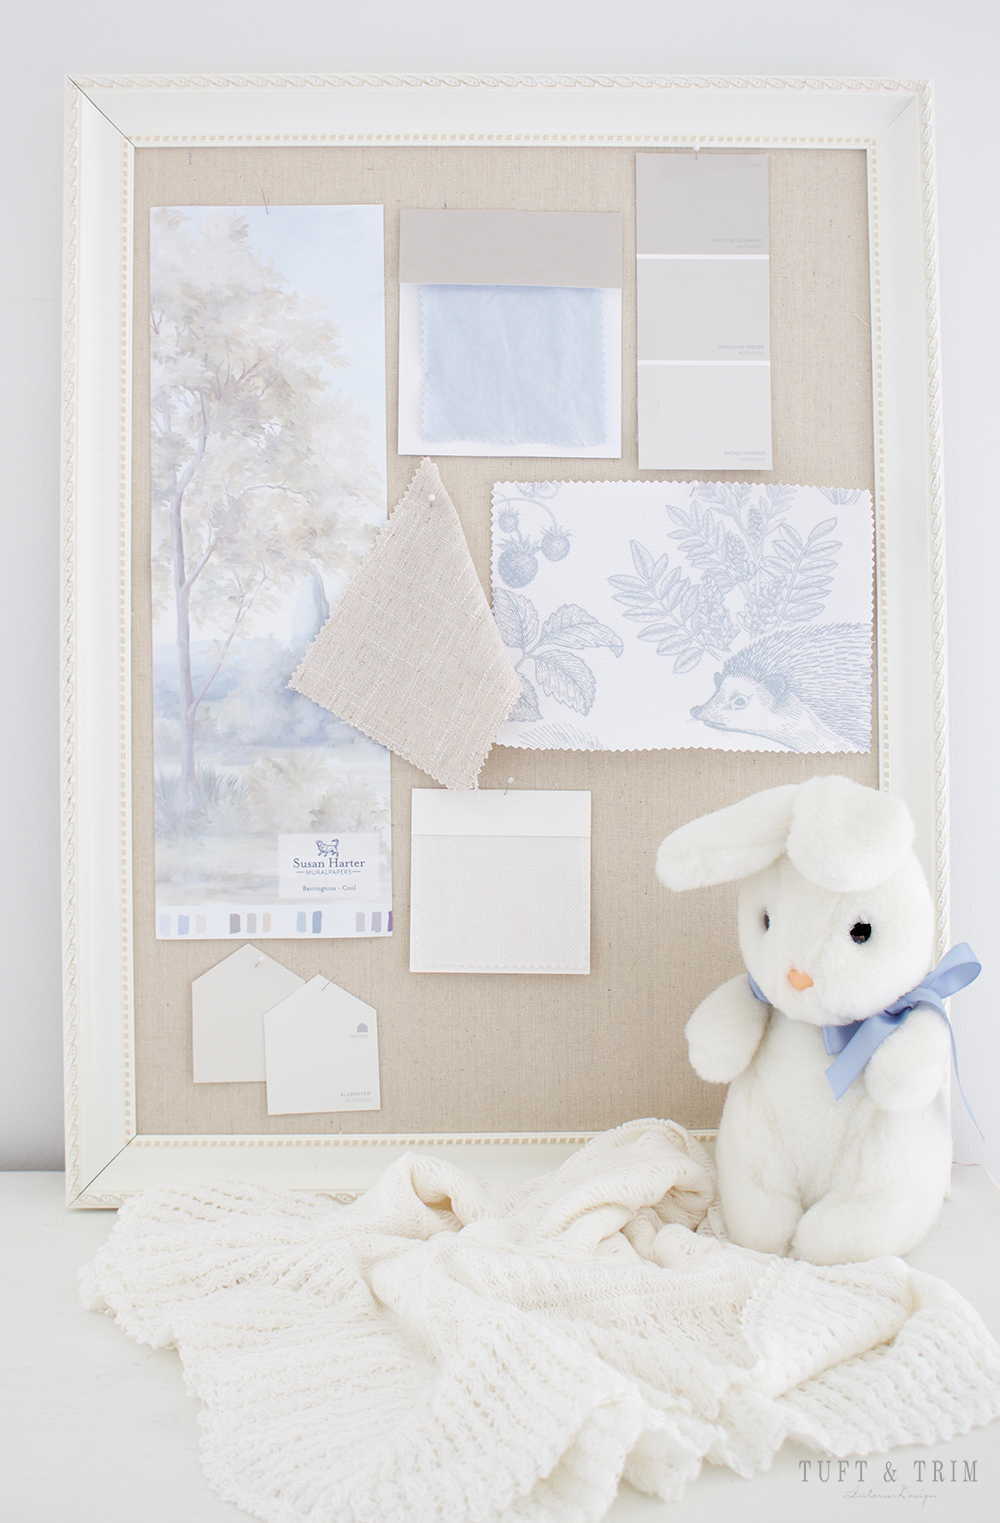 Baby Boy Nursery: Inspired by Nature. Shop the look at tuftandtrim.com!